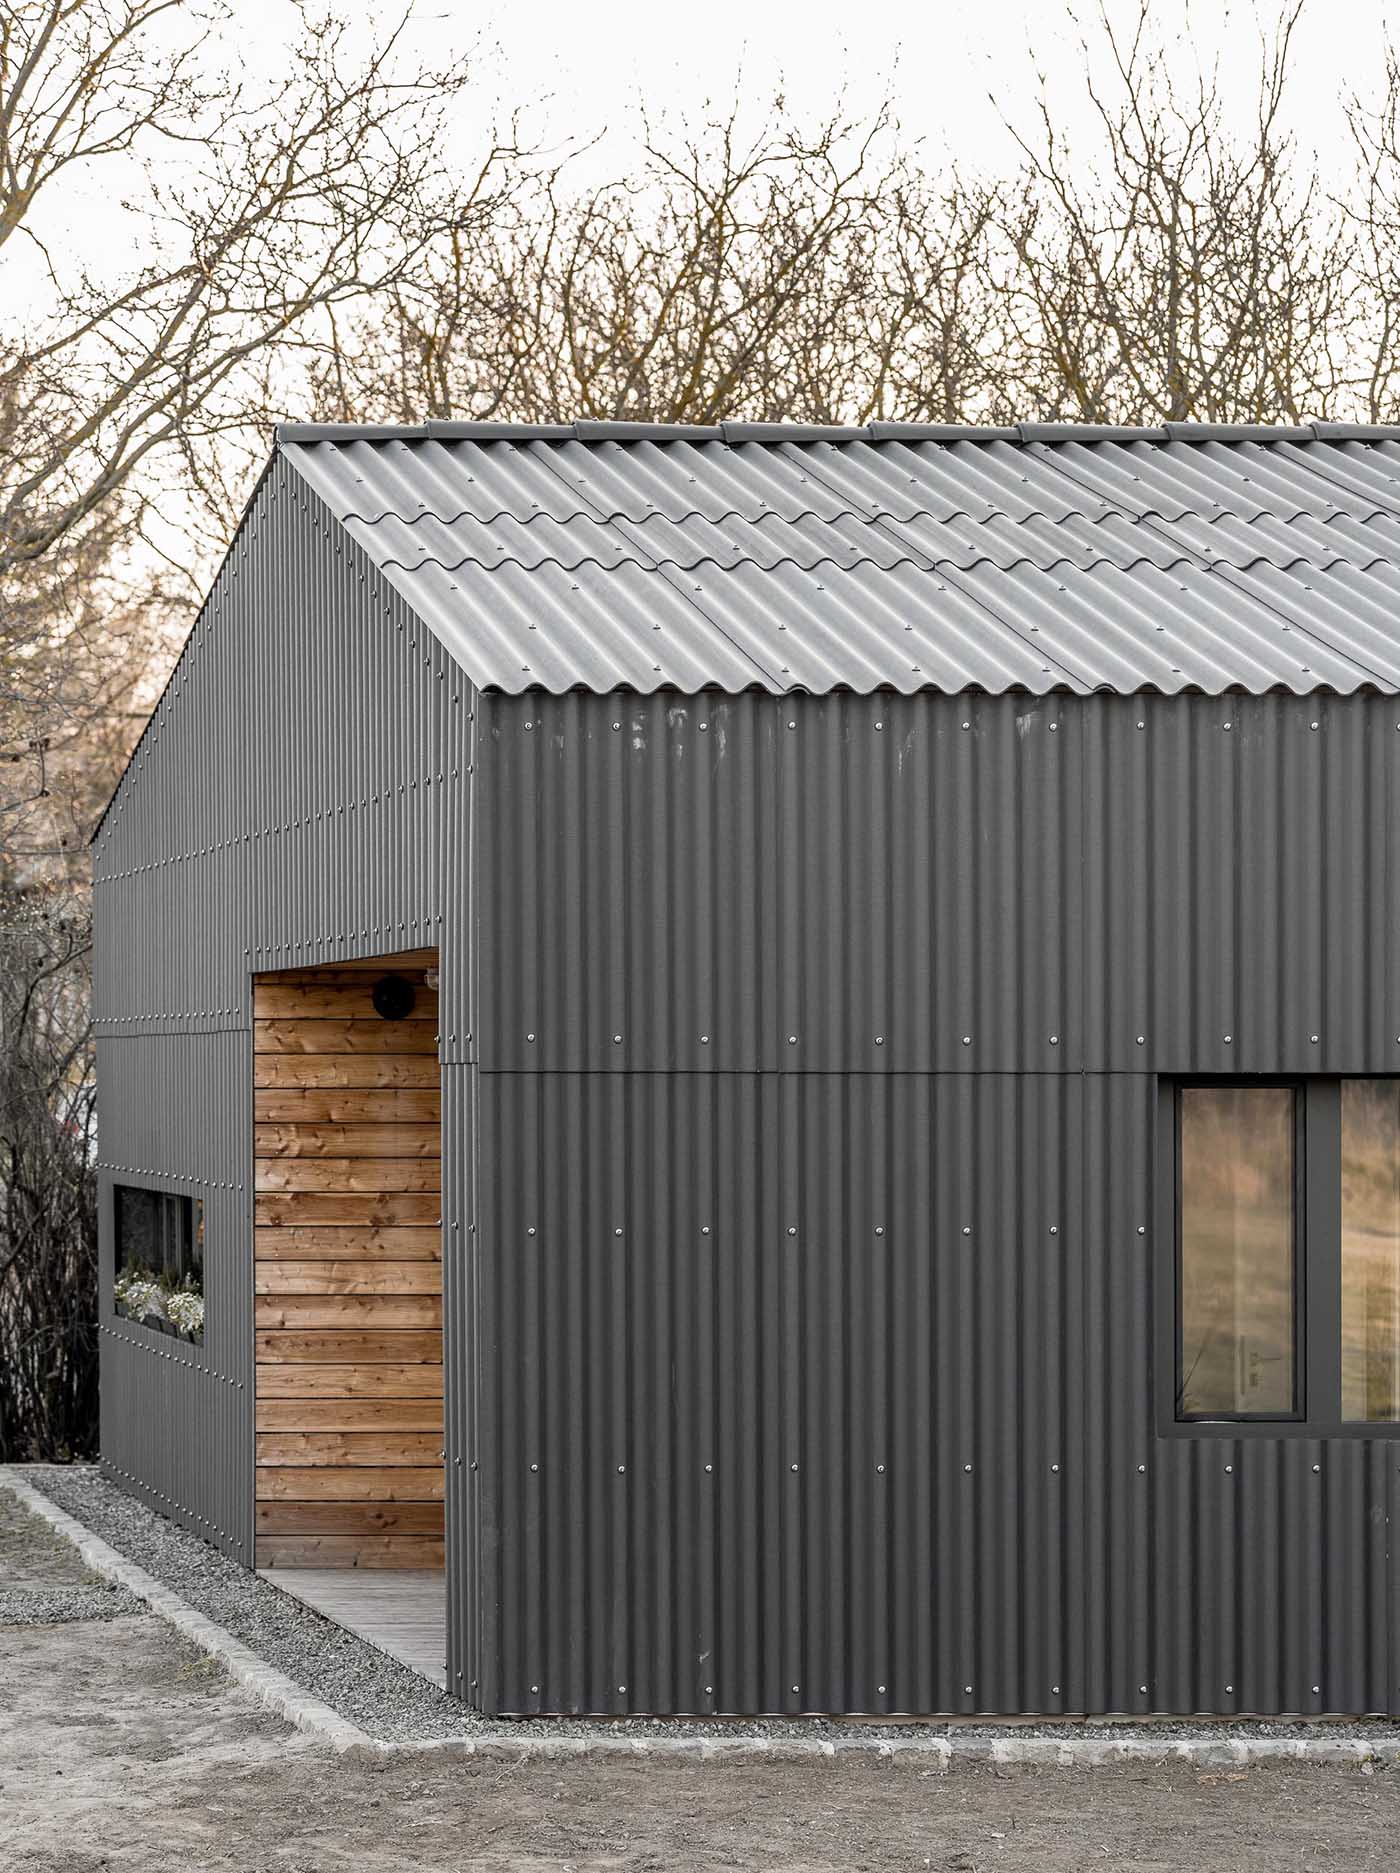 A modern black house with corrugated fibre-cement slate siding, black window frames, and wood lined alcoves.